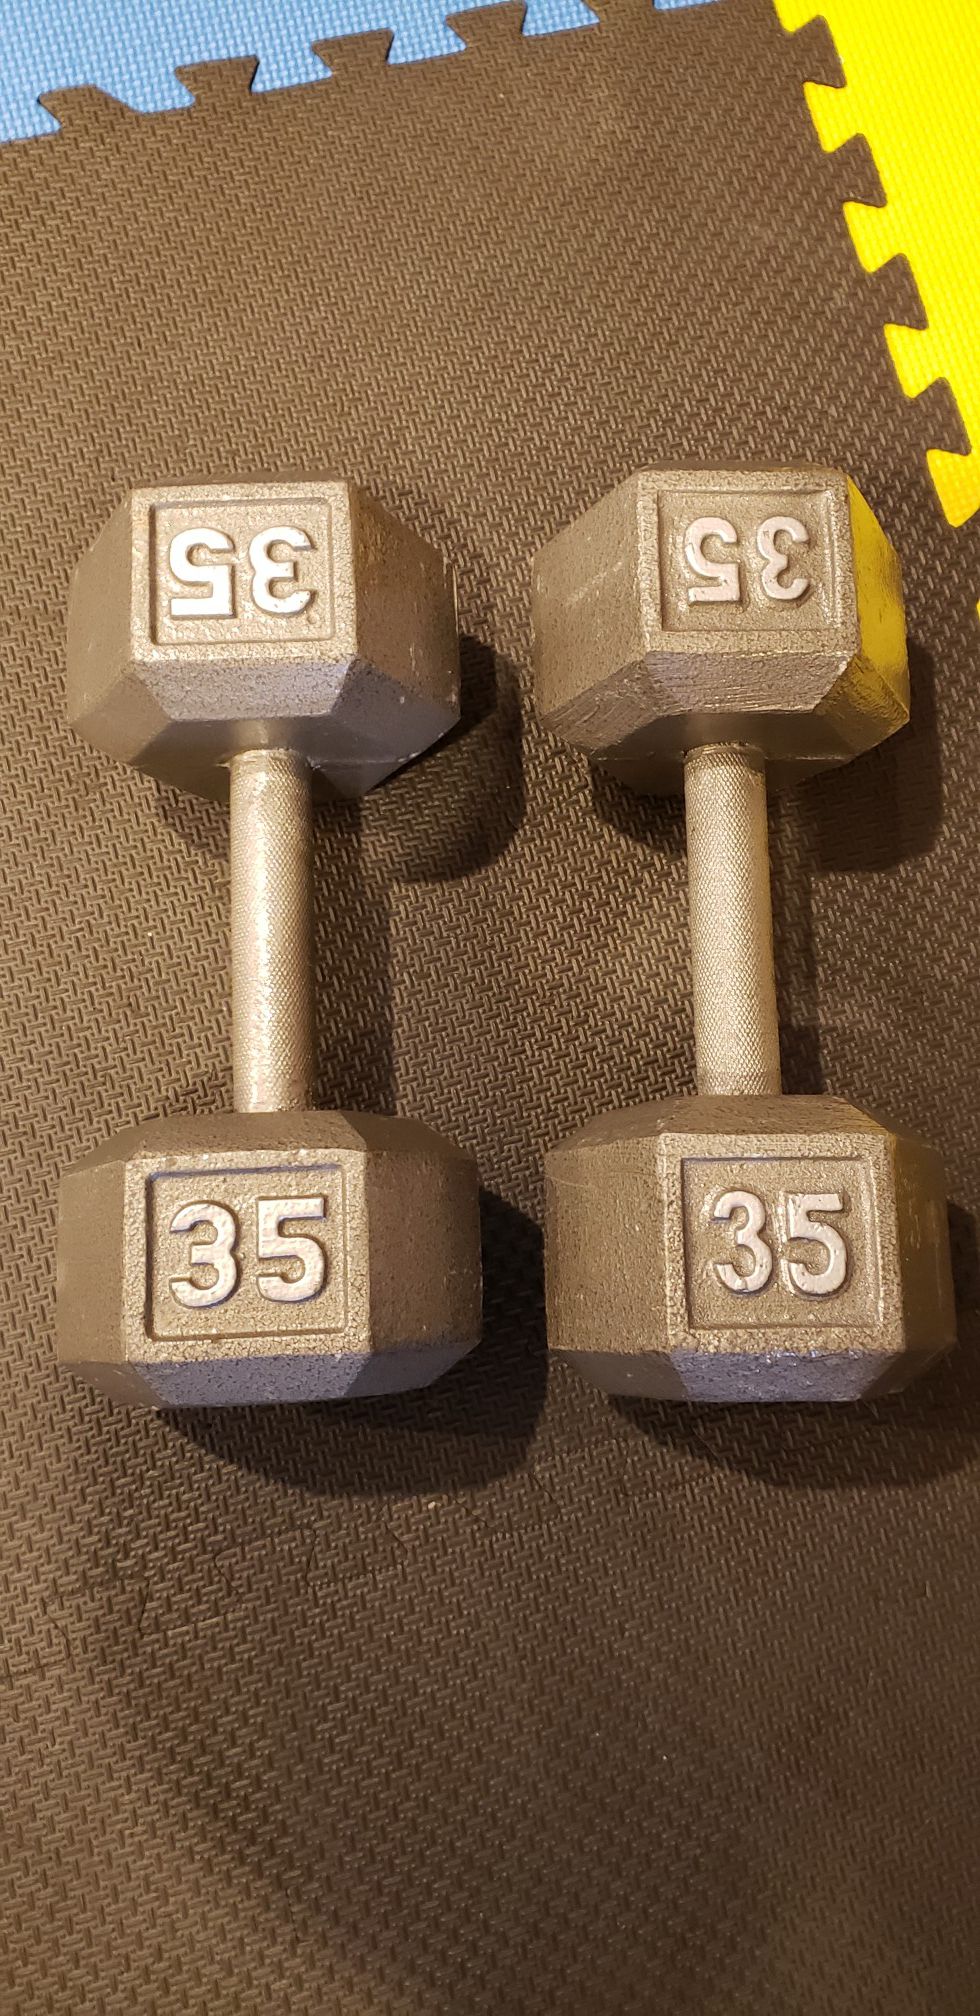 Pair of 35 lbs iron casted hex dumbbells